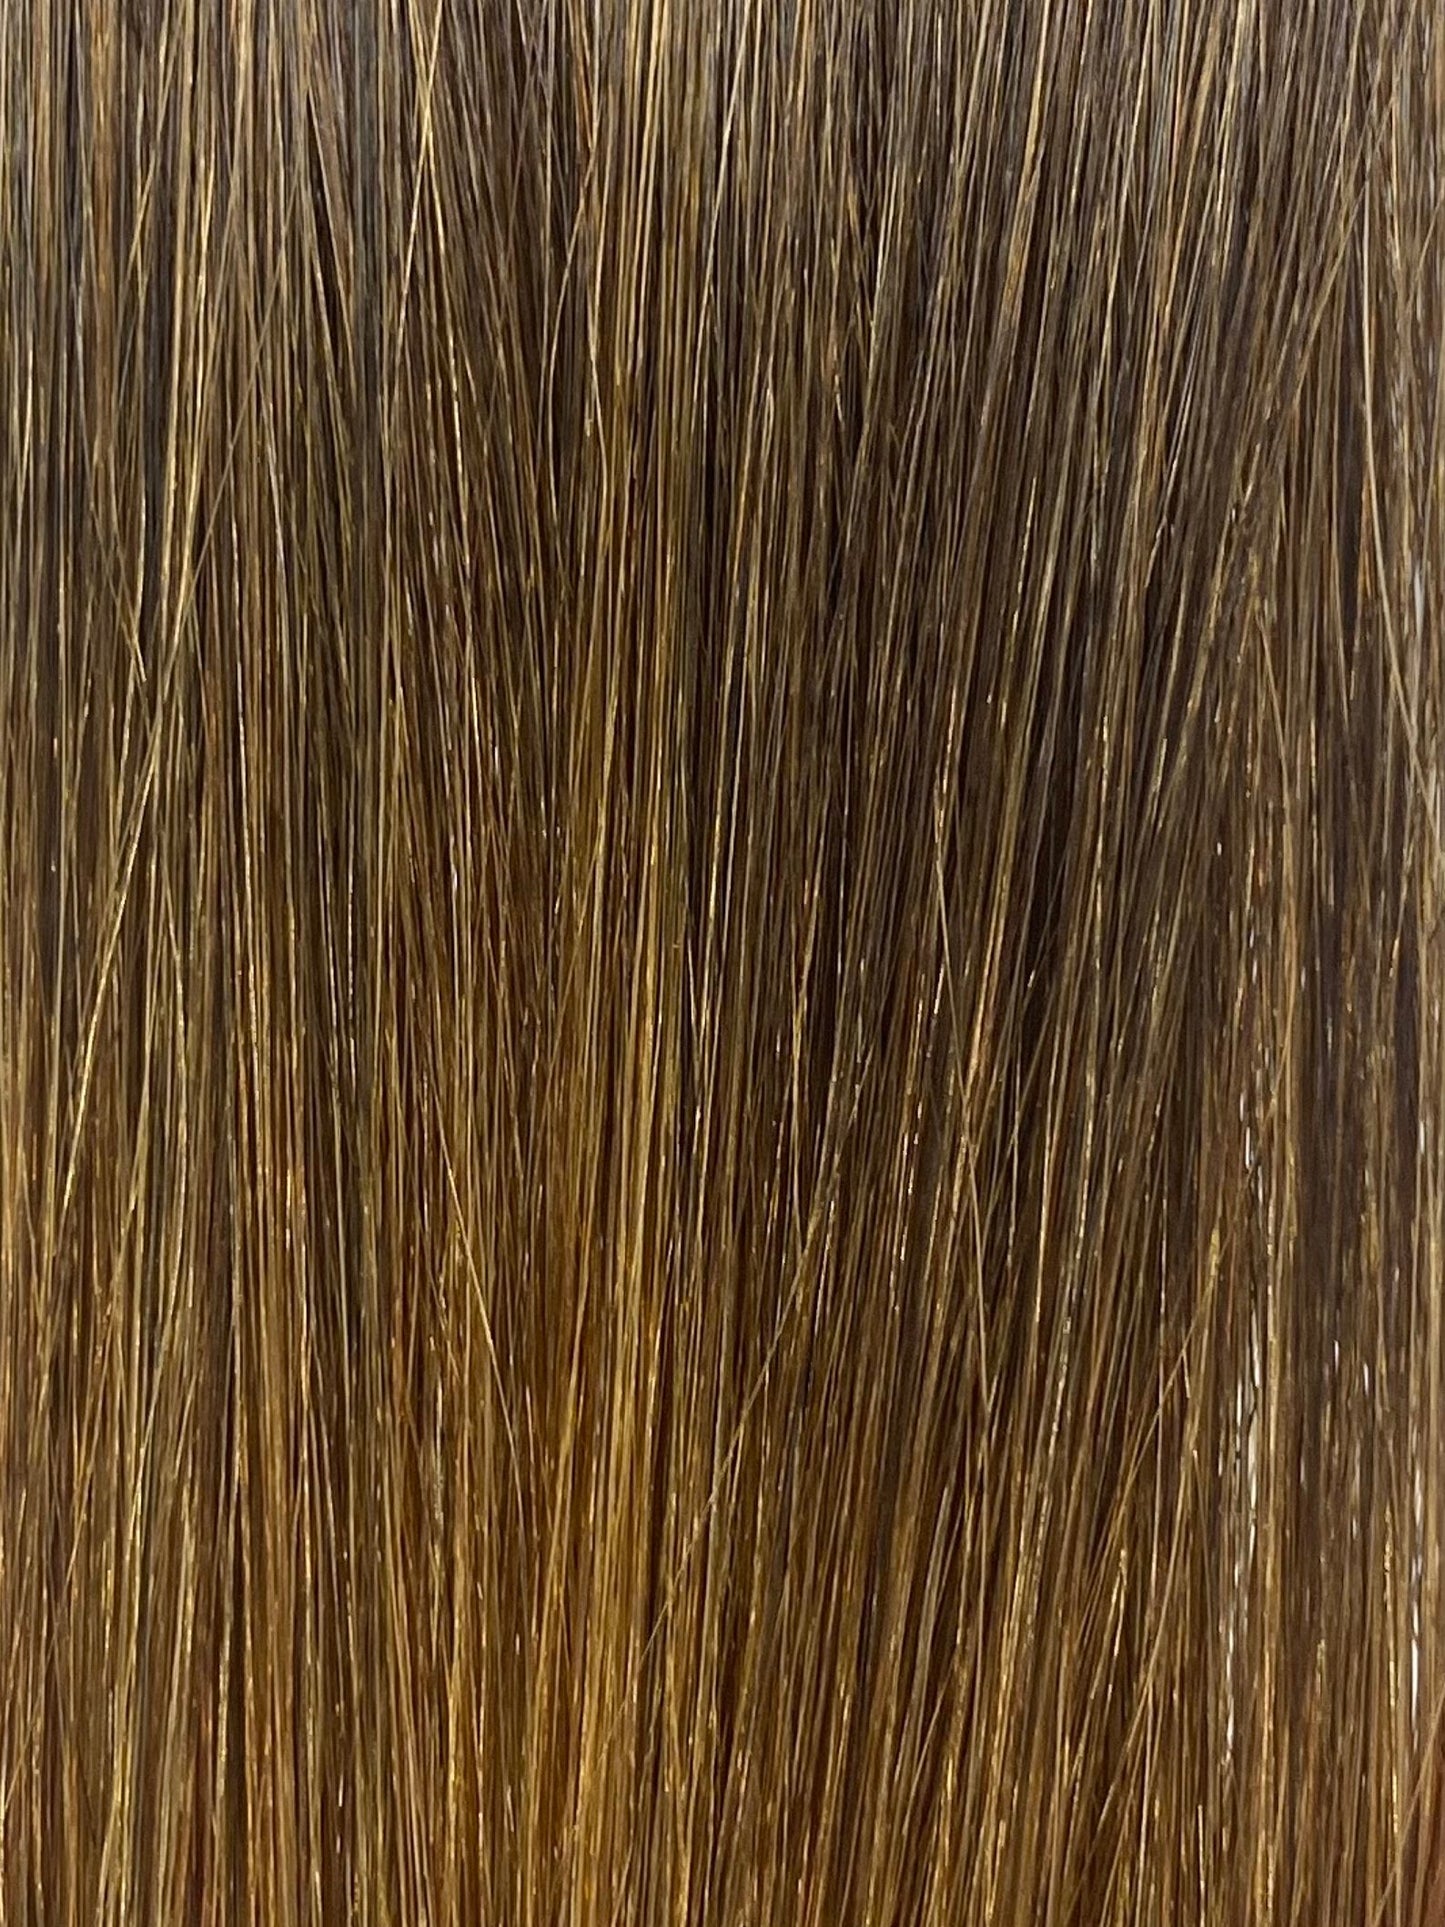 Fusion hair extensions #4/14 - 50cm/20 inches - Chestnut/Copper Golden Light Blonde Highlight Fusion Euro So Cap 